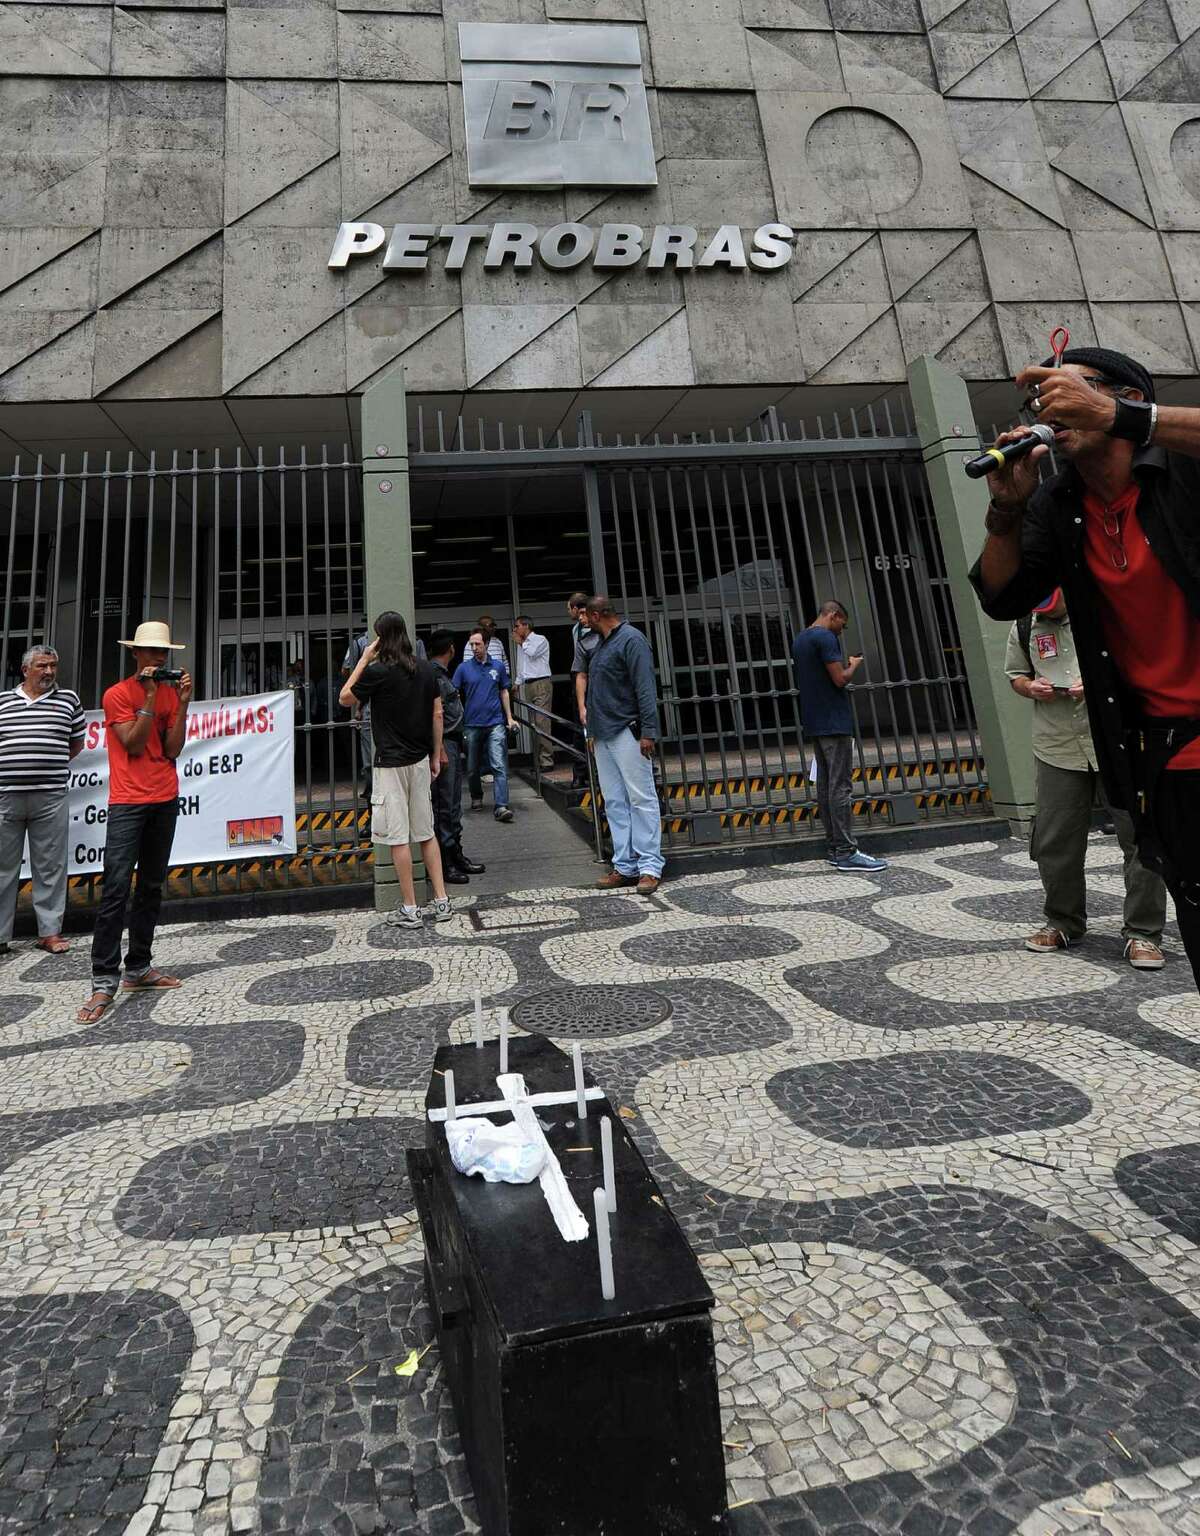 Oil industry workers demonstrate against a pre-salt auction for deepwater deposits at the huge Libra field, in front of Petrobras headquartes in Rio de Janeiro on October 17, 2013. Next October 21 sees Brazil's first pre-salt auction in six years for deepwater deposits at the huge Libra field in the southeastern Santos basin where recoverable reserves of some 12 billion barrels could see production of an estimated 1m barrels per day (bpd) in five years. AFP PHOTO/VANDERLEI ALMEIDAVANDERLEI ALMEIDA/AFP/Getty Images